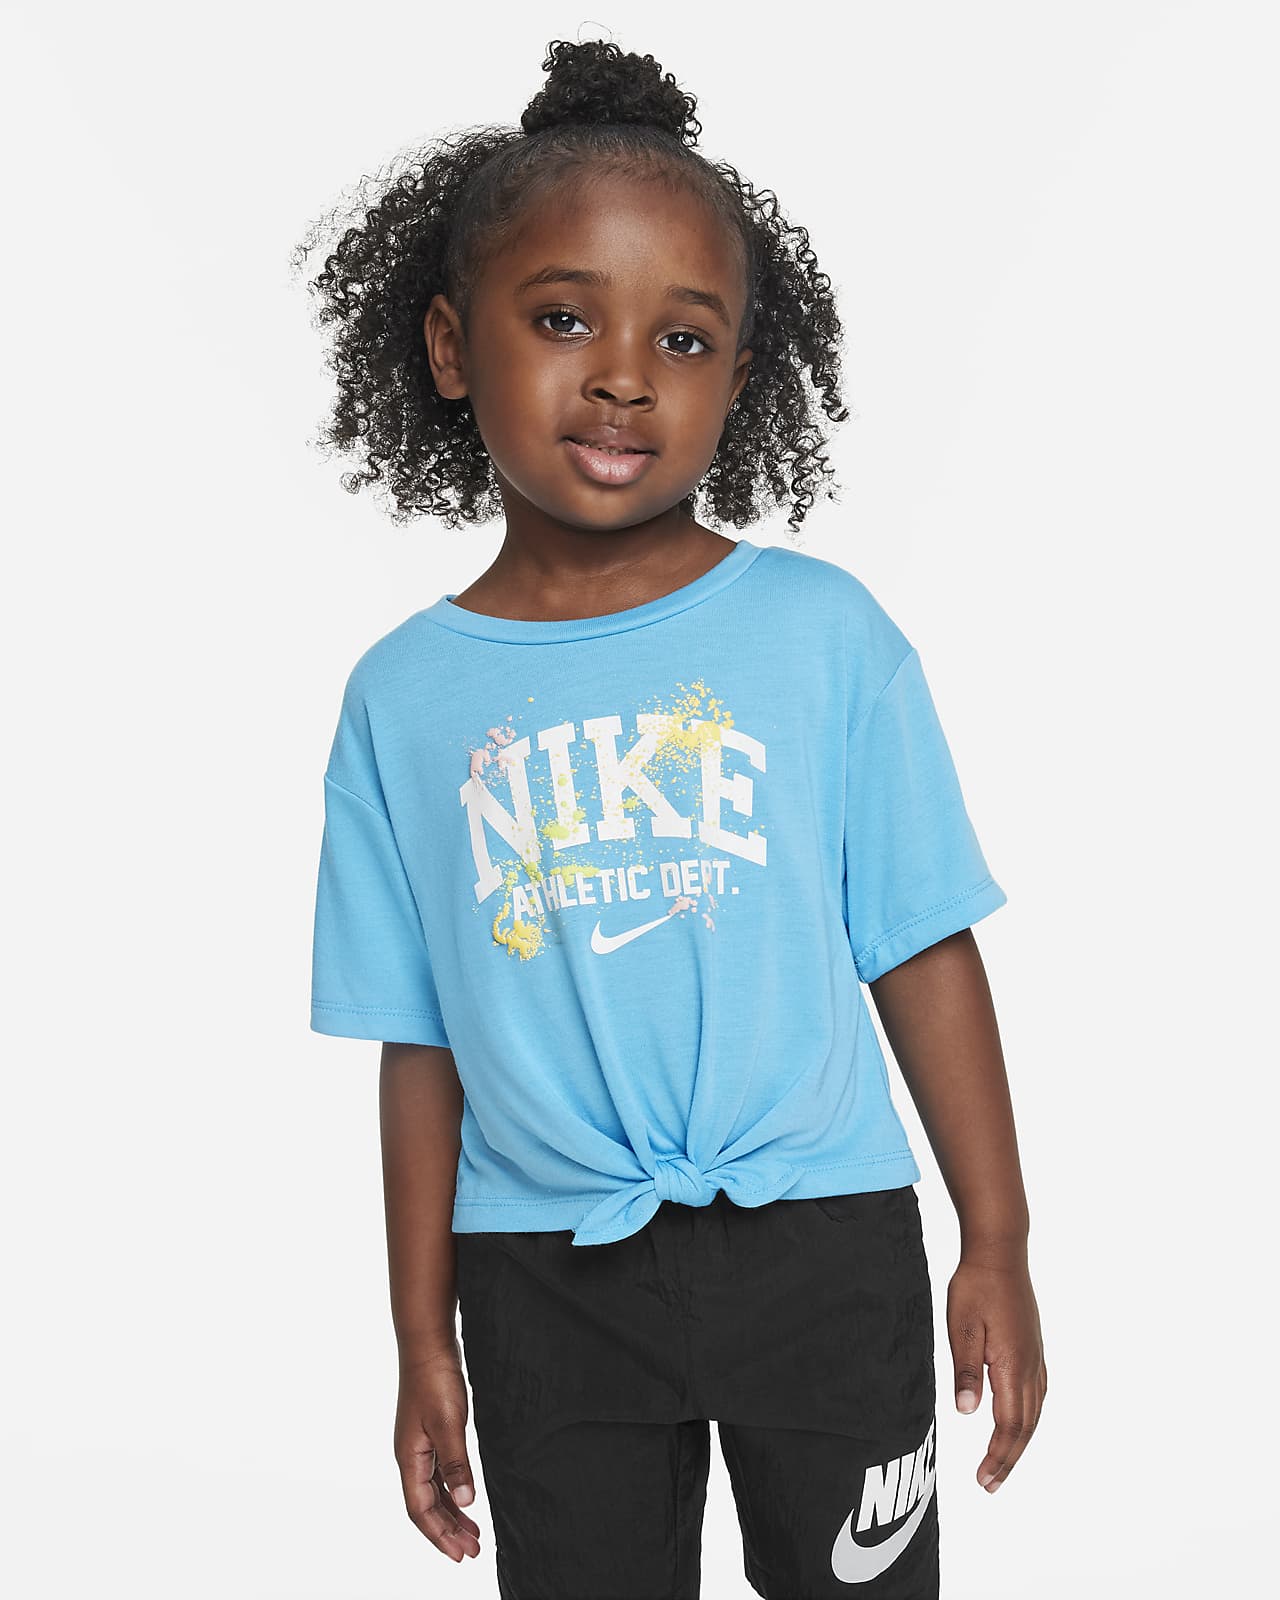 Nike "Just DIY It" Knotted Top Toddler T-Shirt